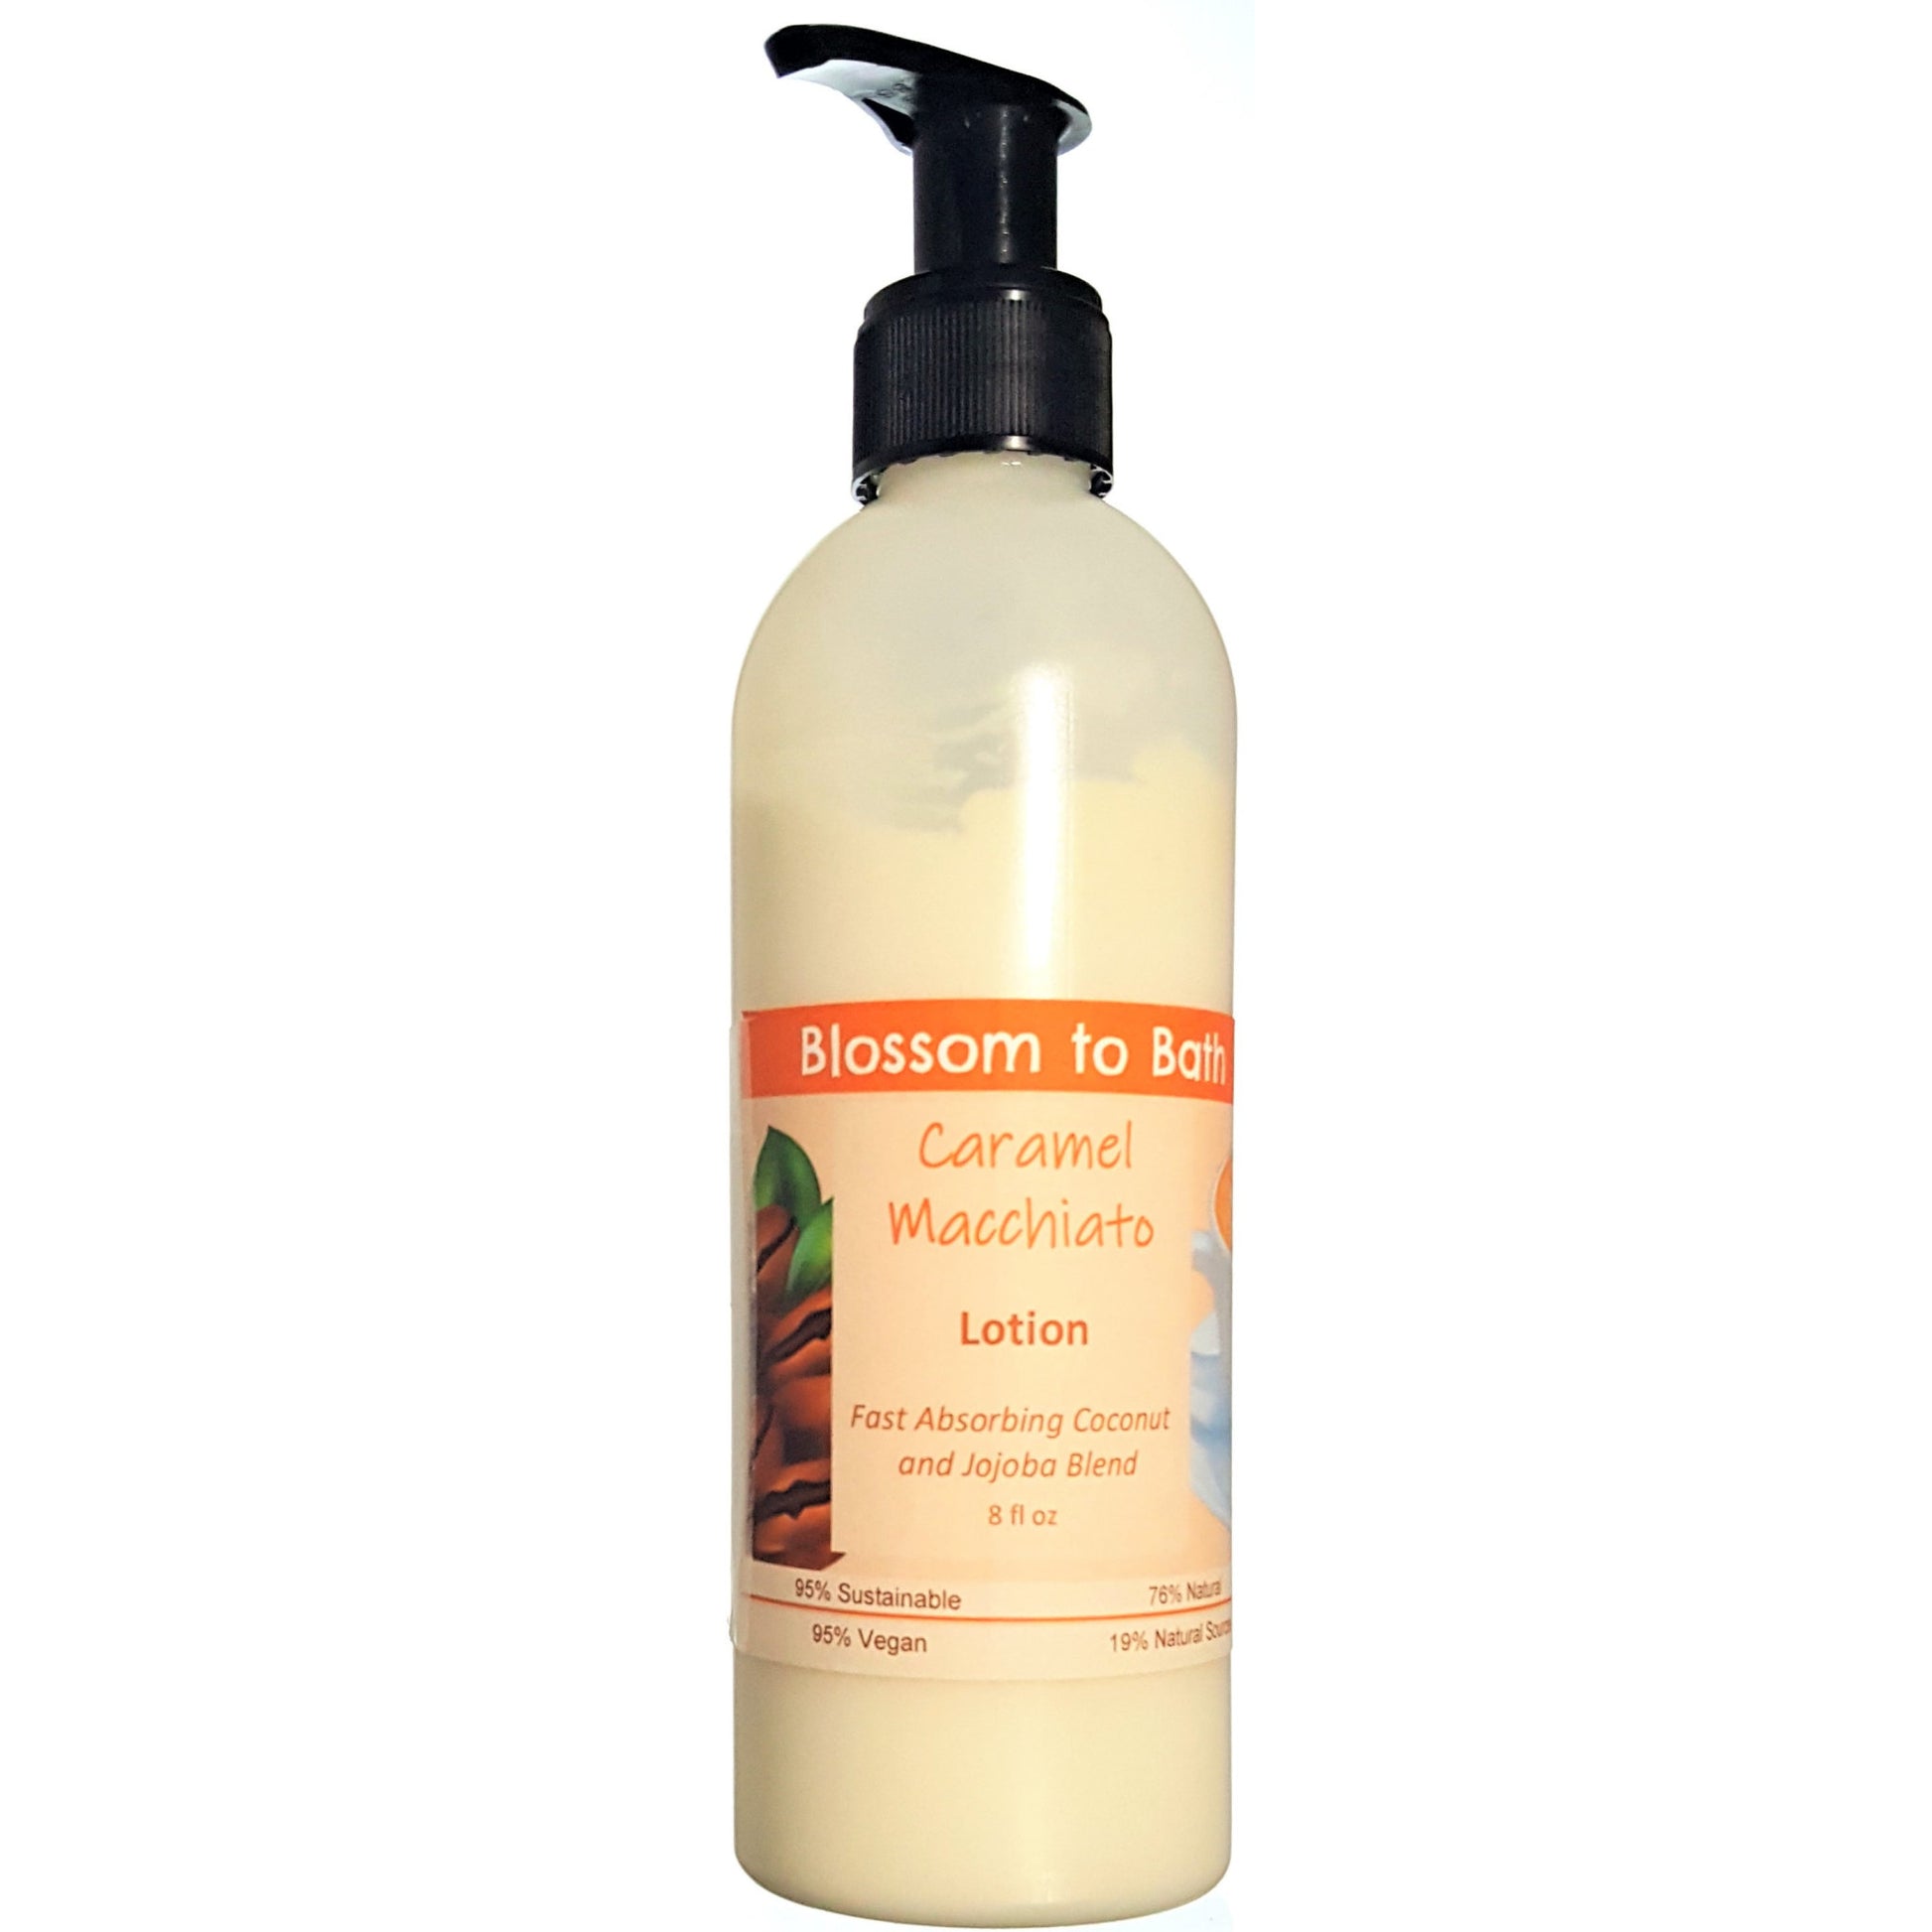 Buy Blossom to Bath Caramel Macchiato Lotion from Flowersong Soap Studio.  Daily moisture  that soaks in quickly made with organic oils and butters that soften and smooth the skin  Luscious vanilla and warm rich caramel - a gourmet coffee experience with sweet caramel in a bed of vibrant coffee;